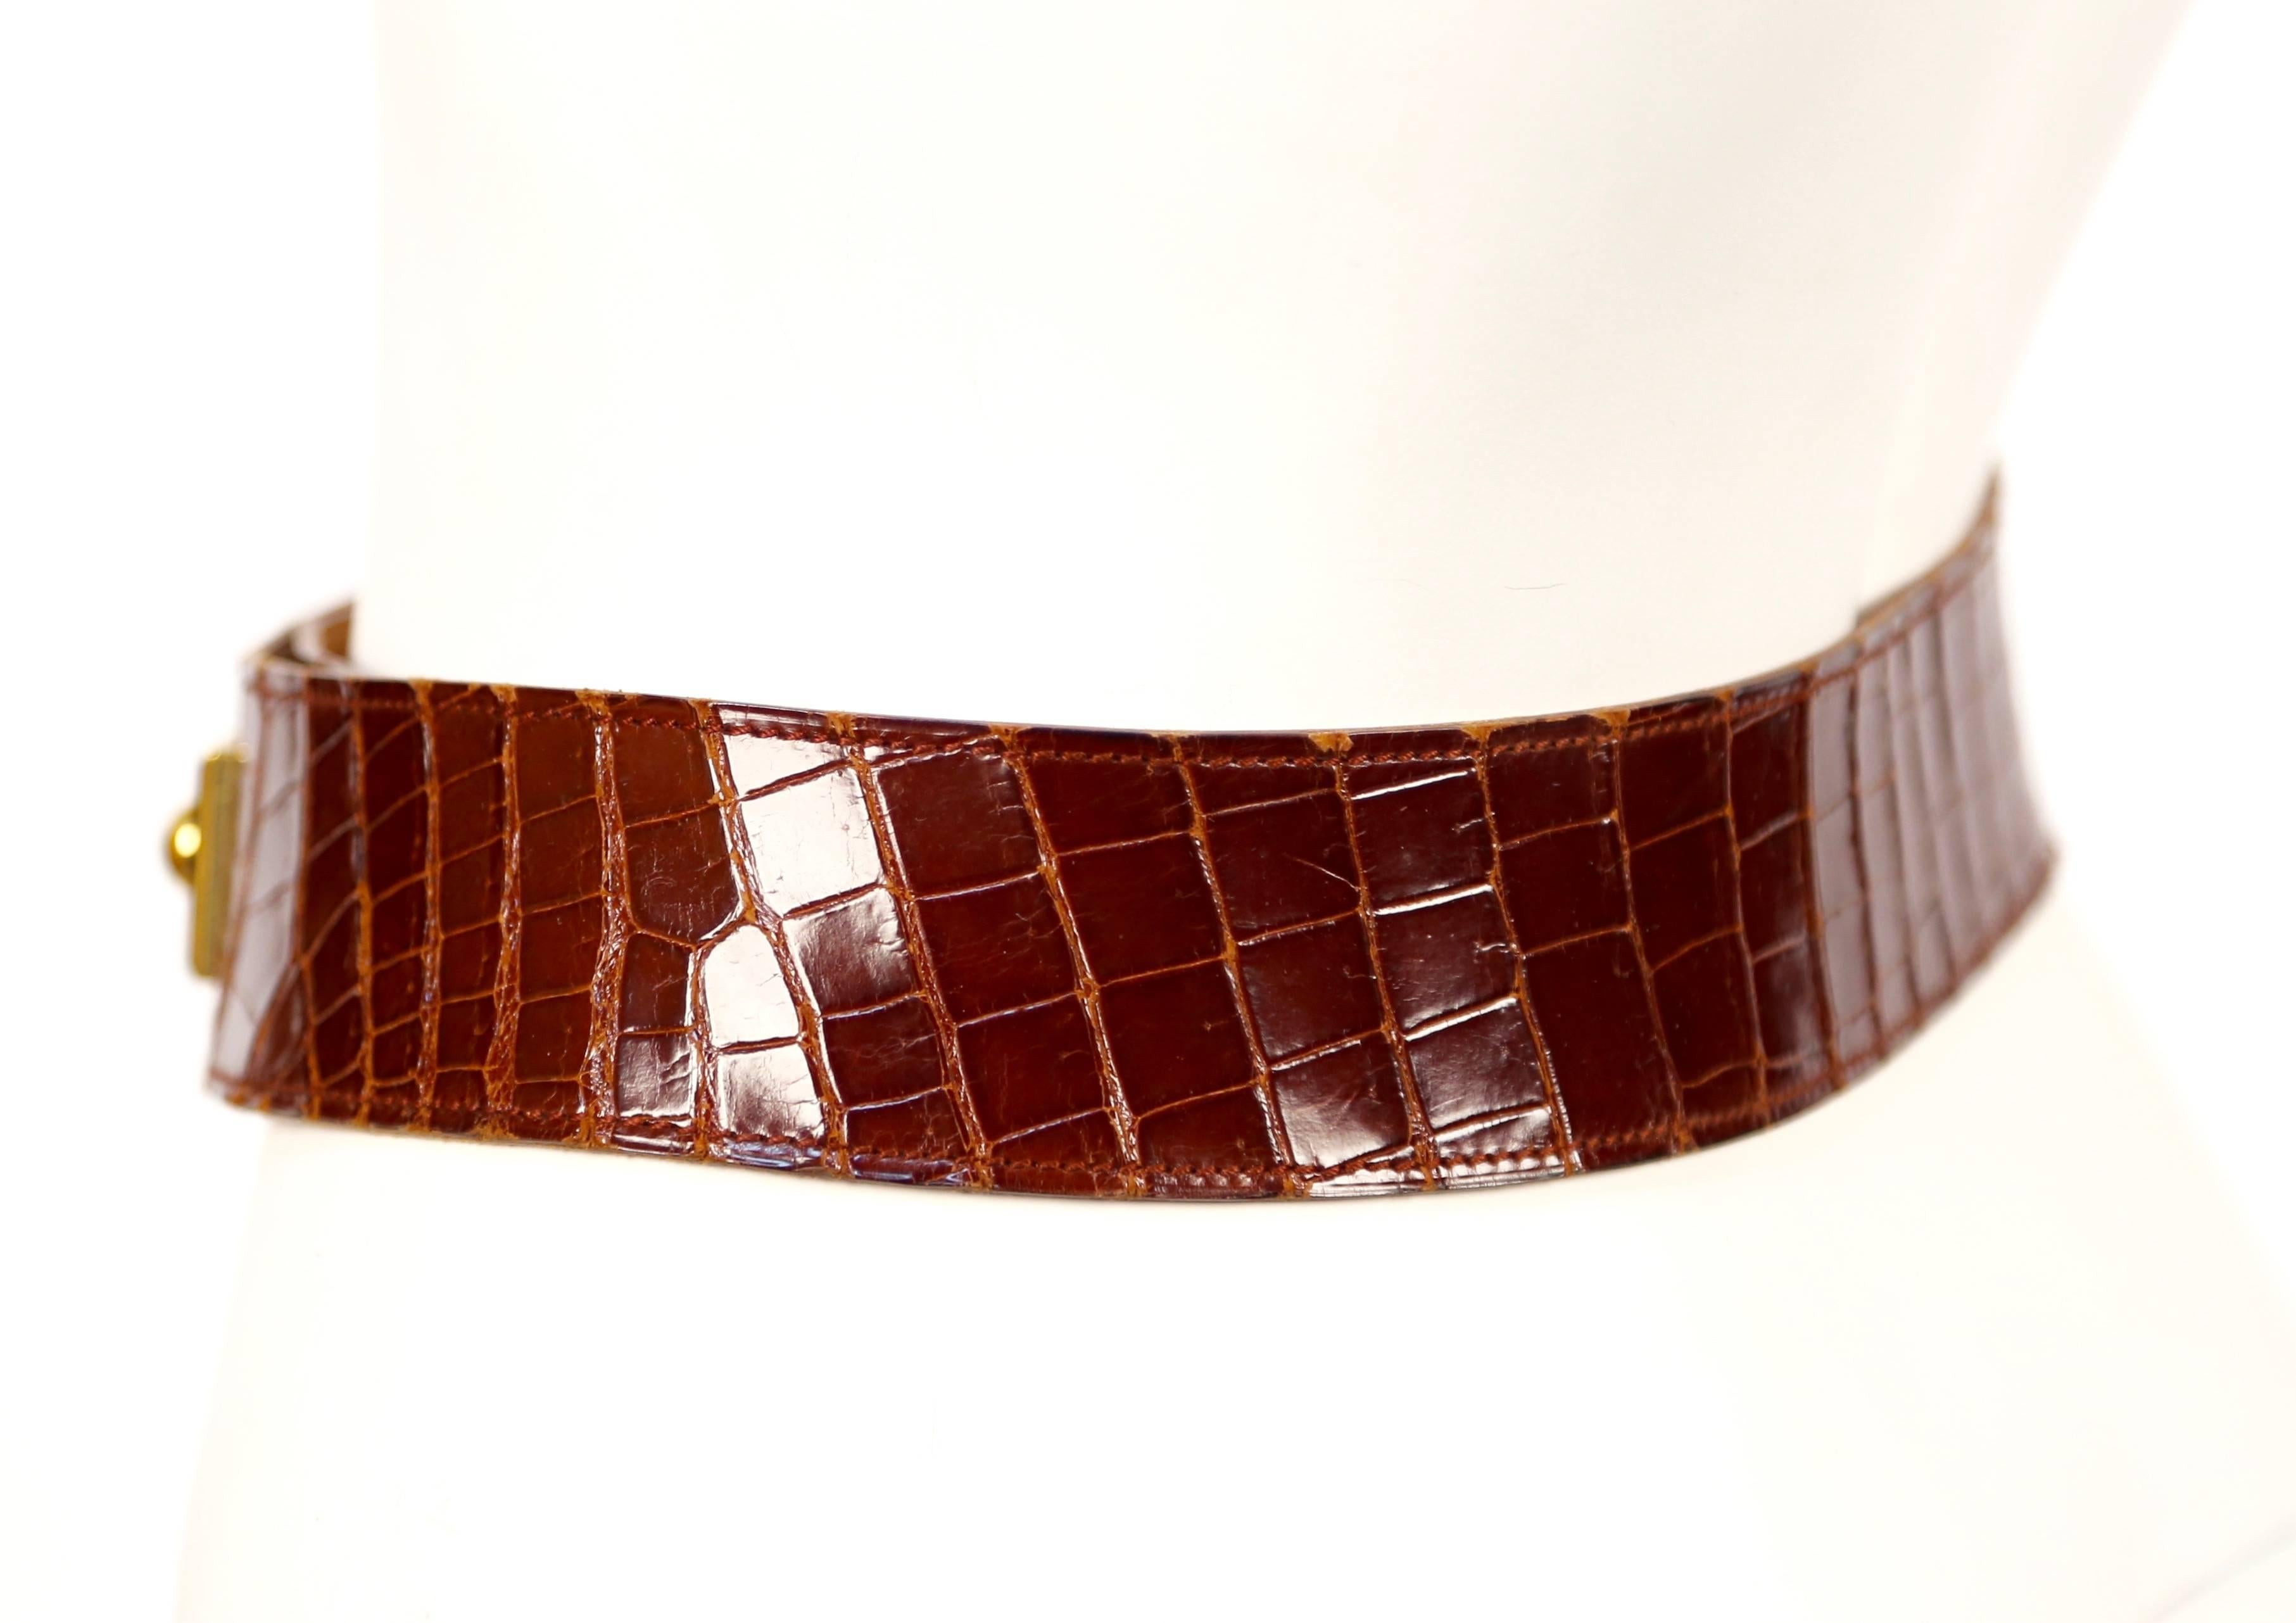 Very rare, rich brown crocodile belt from Hermes dating to the late 1960's. Belt fits a 24-27